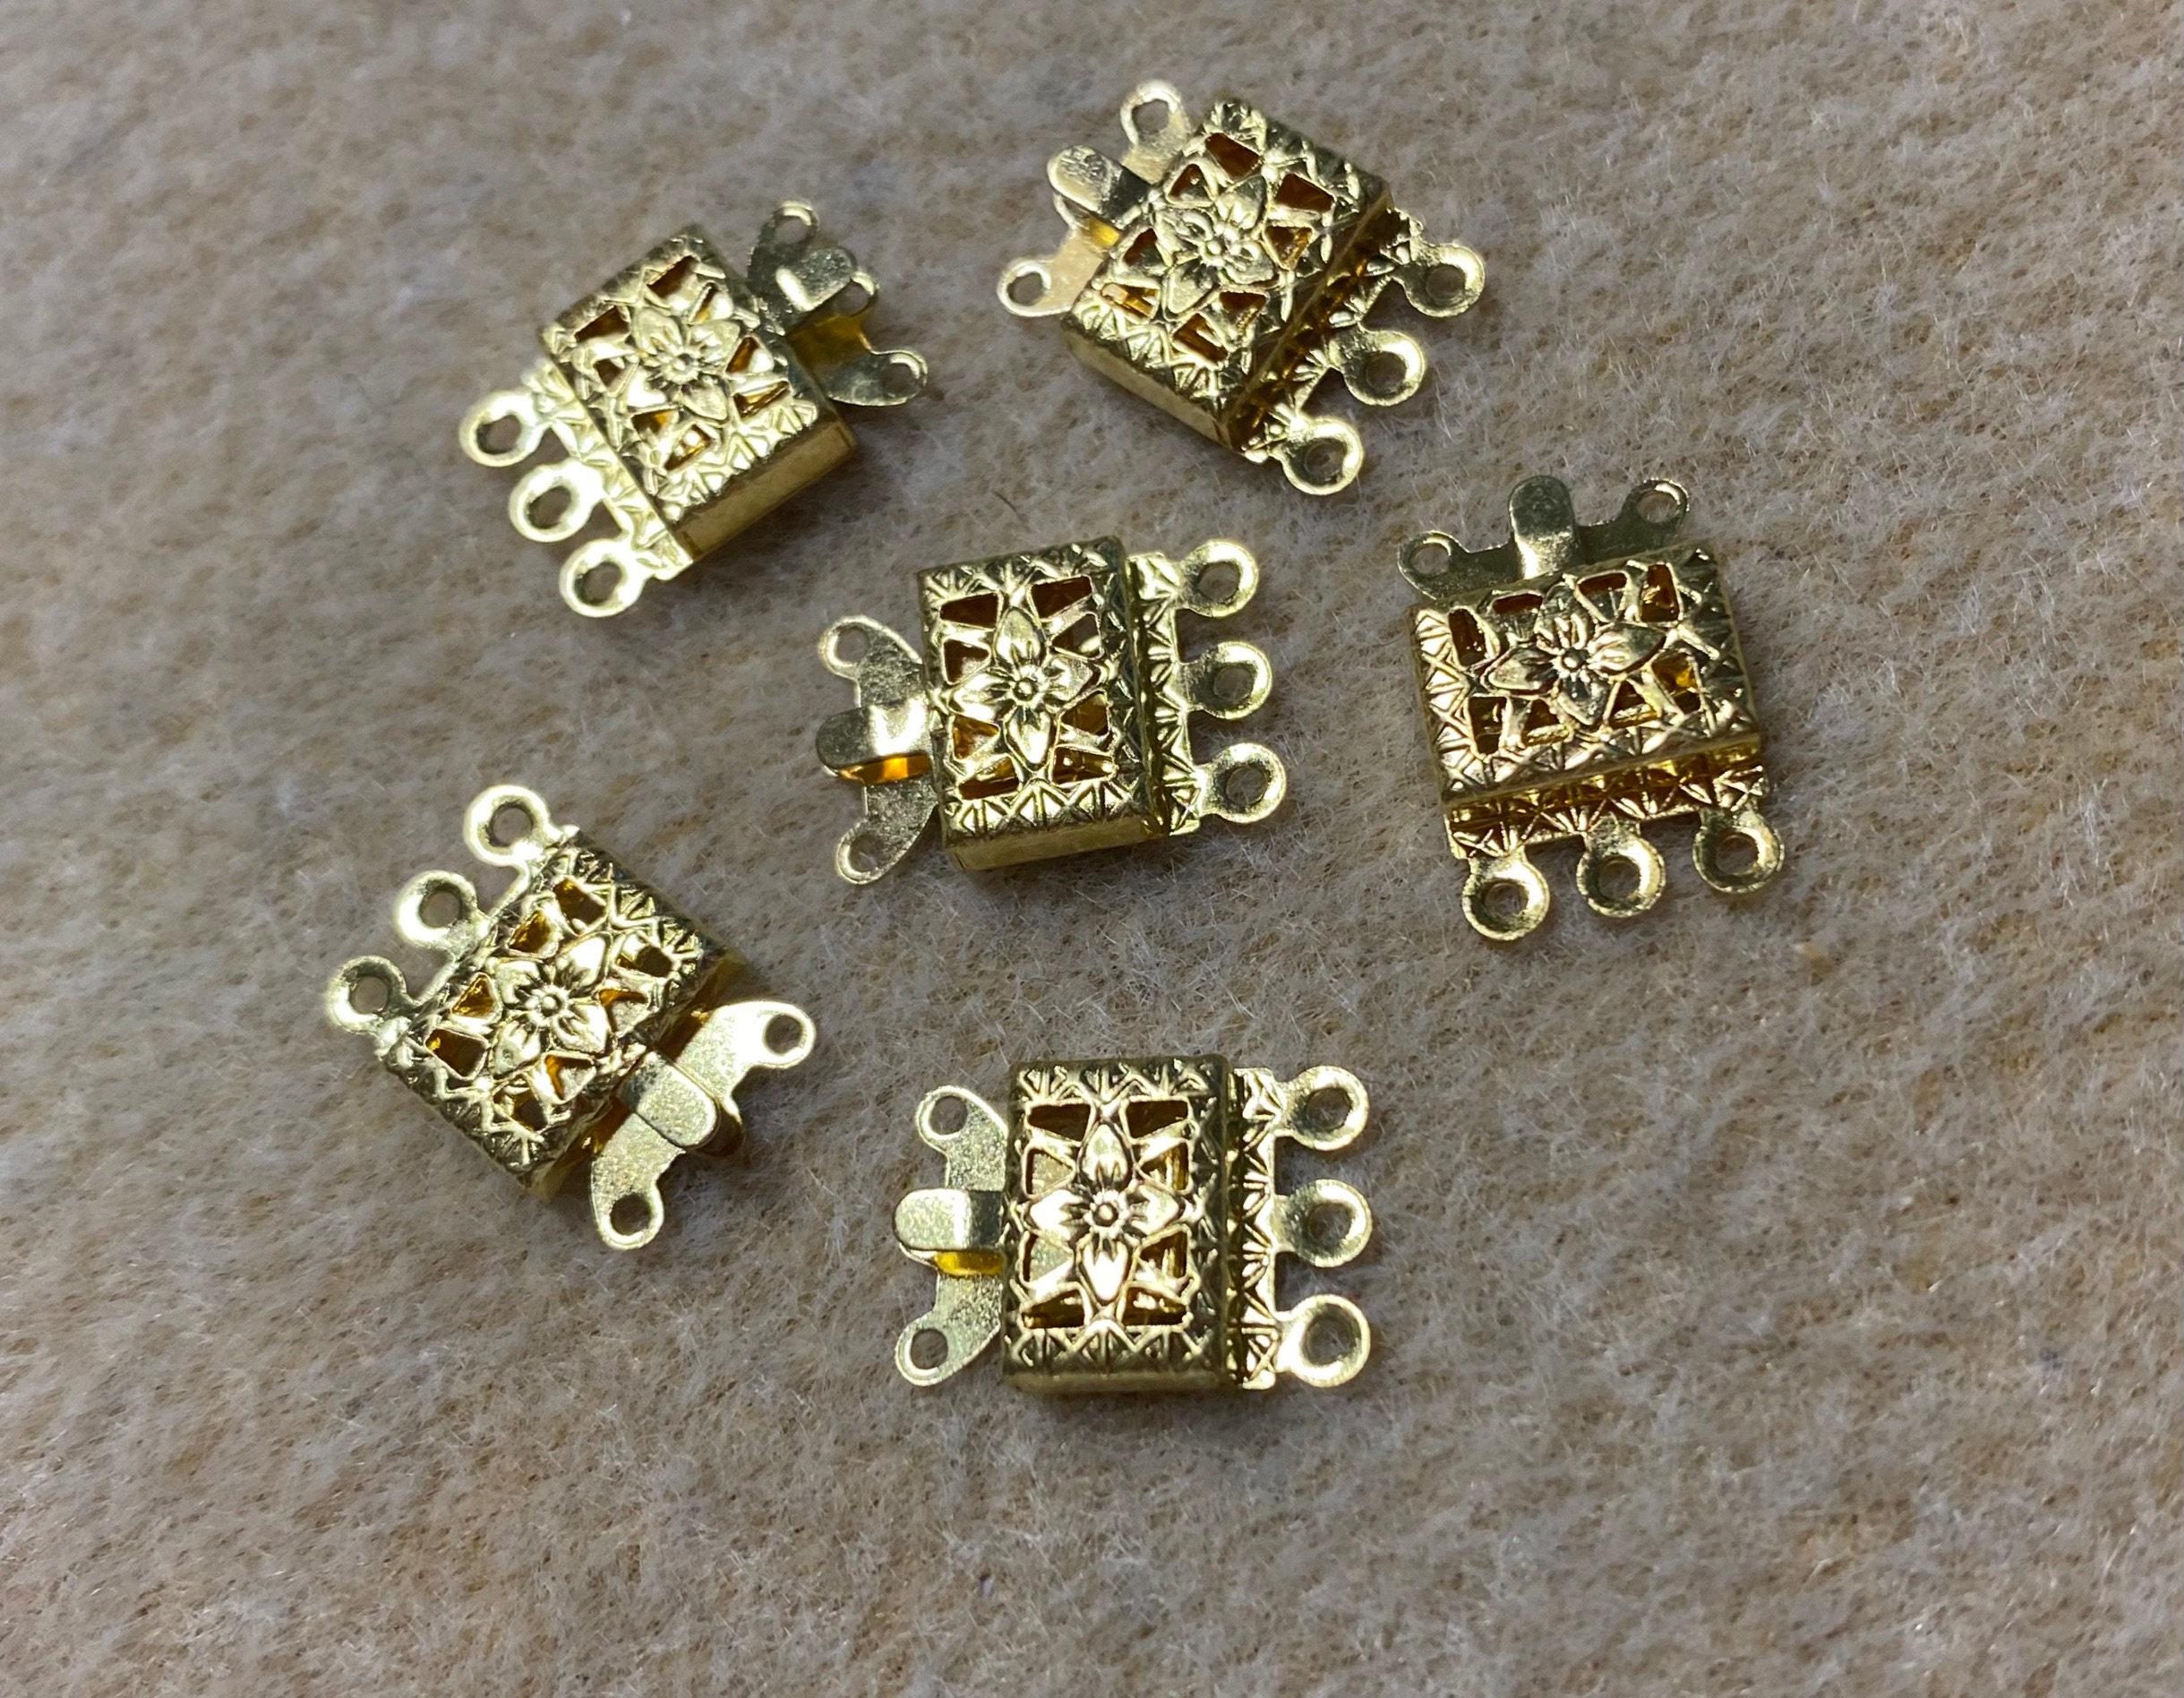 1 Piece 3 Strand Magnetic Clasps, 3 Hole Strong Magnetic Clasps